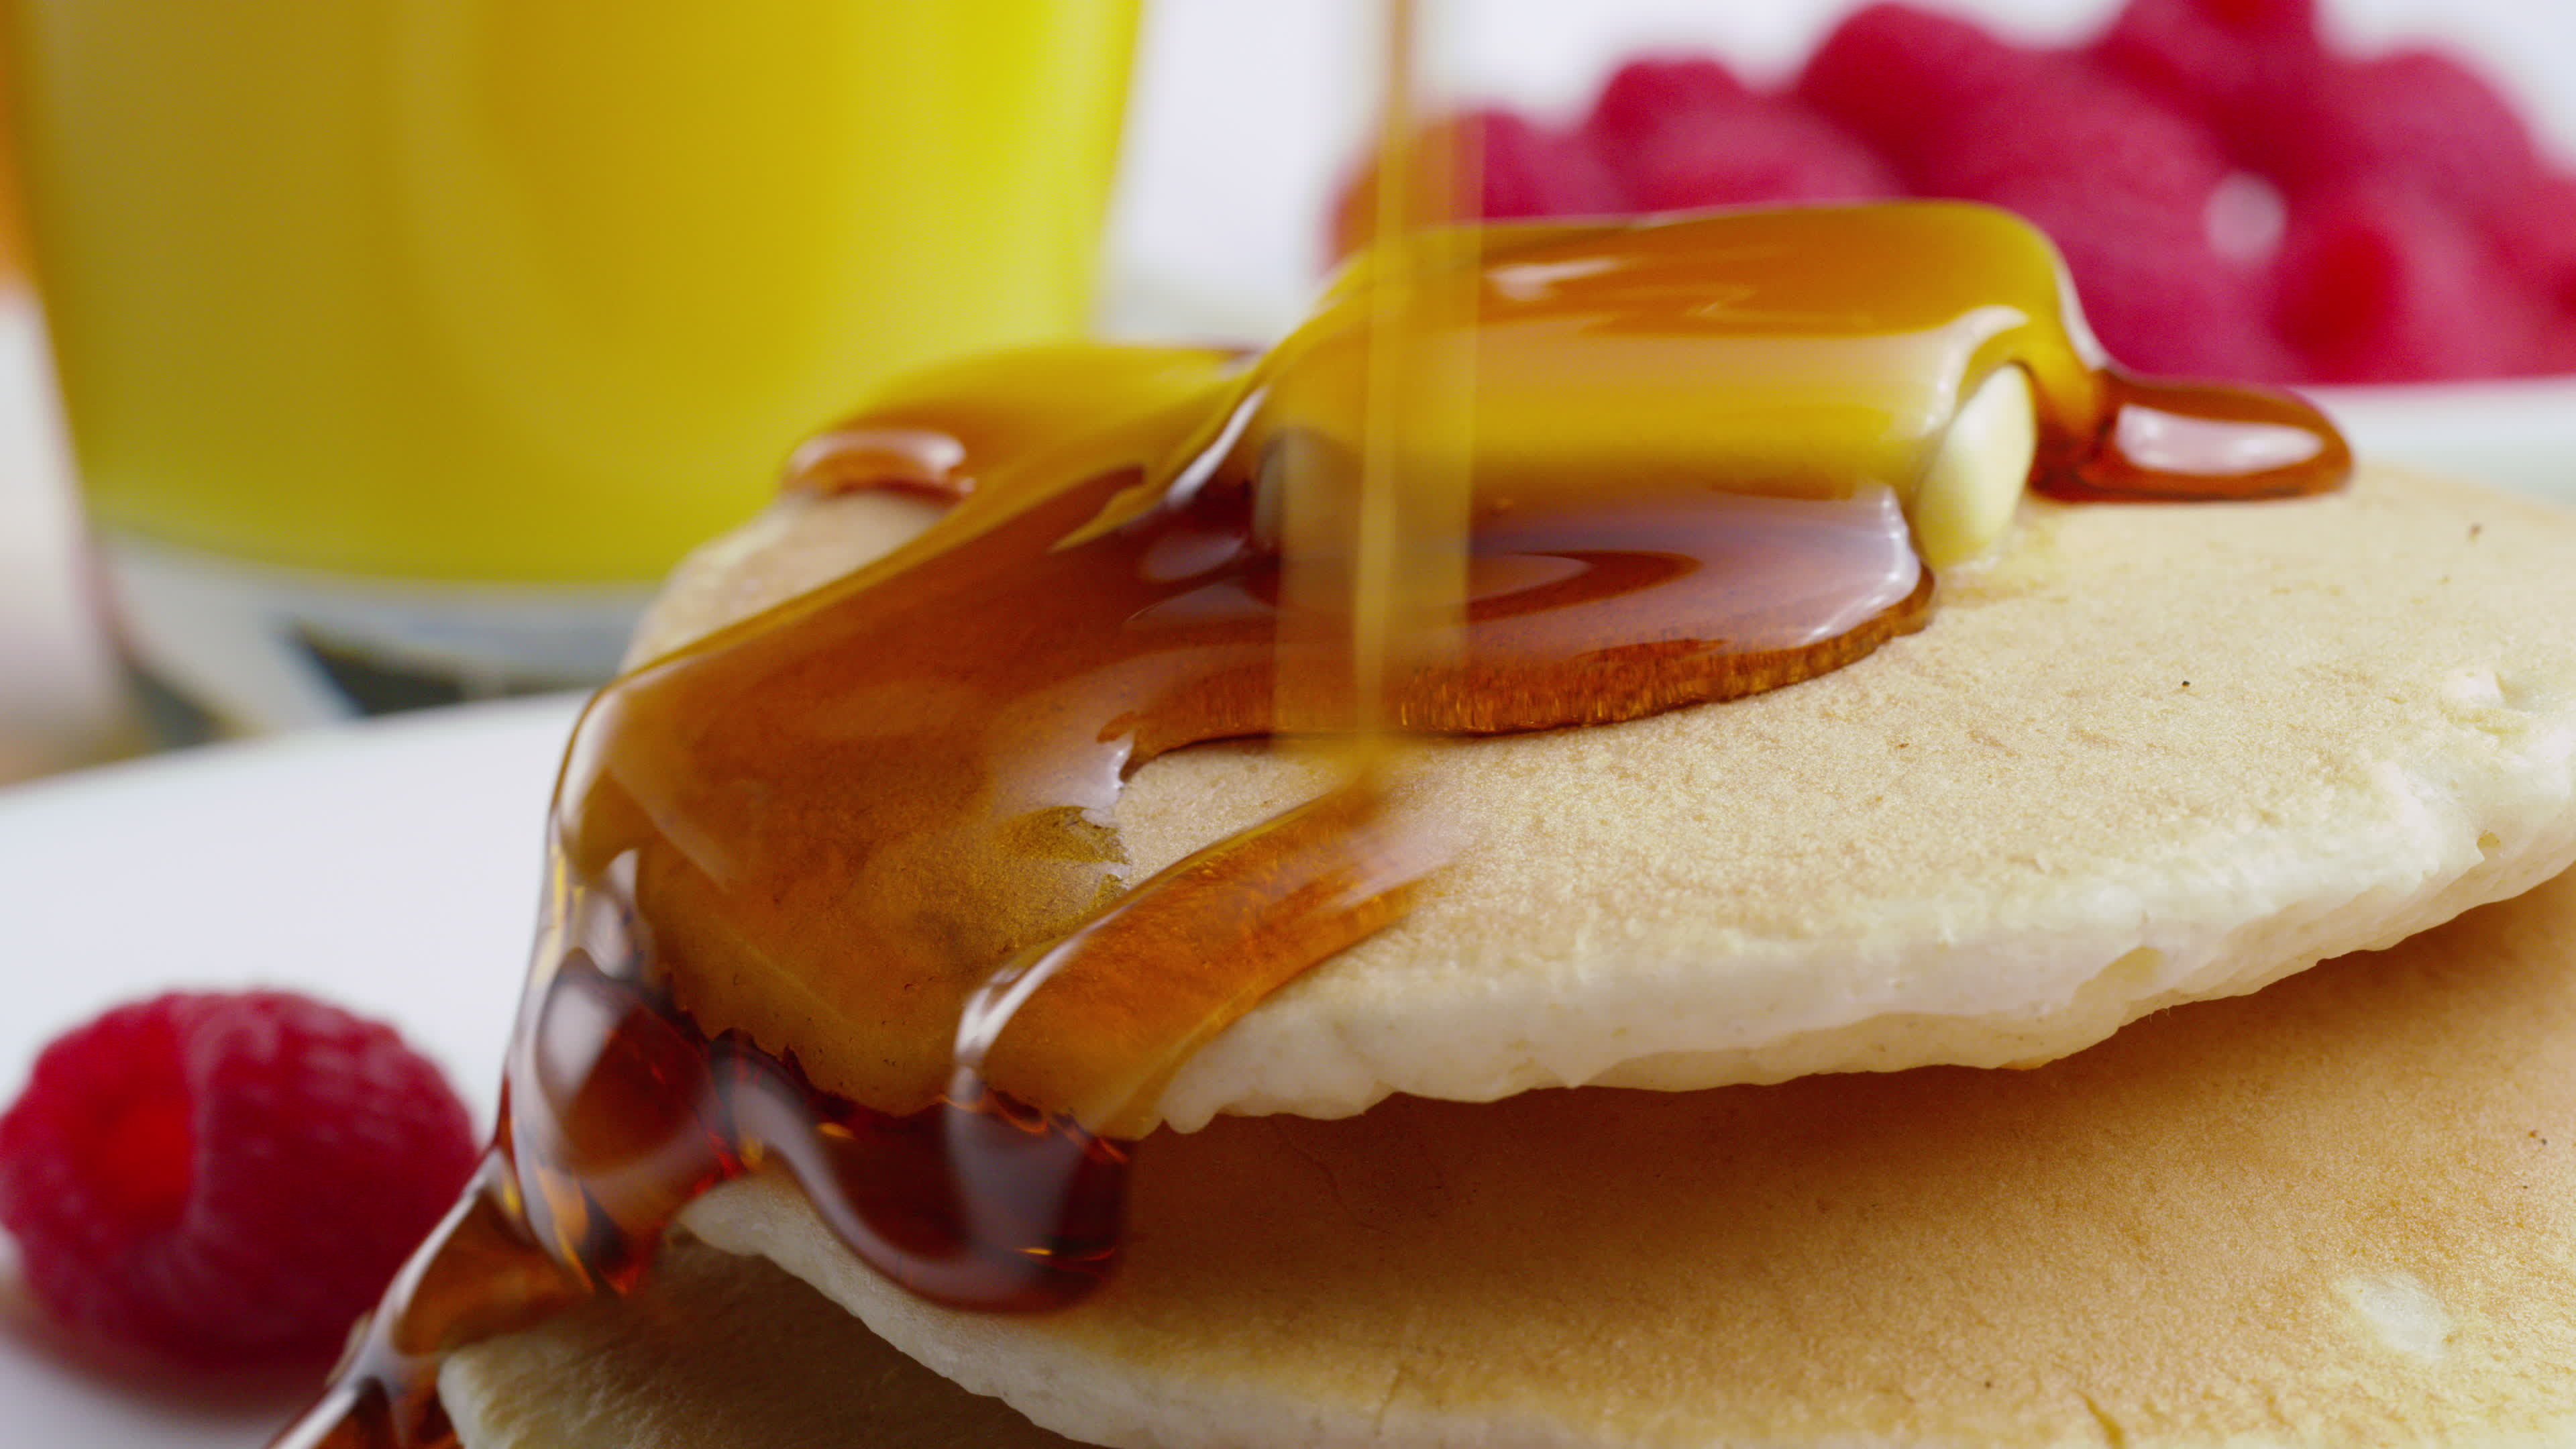 Pouring syrup, Pancake closeup, Delicious drizzle, Mouth-watering video, 3840x2160 4K Desktop